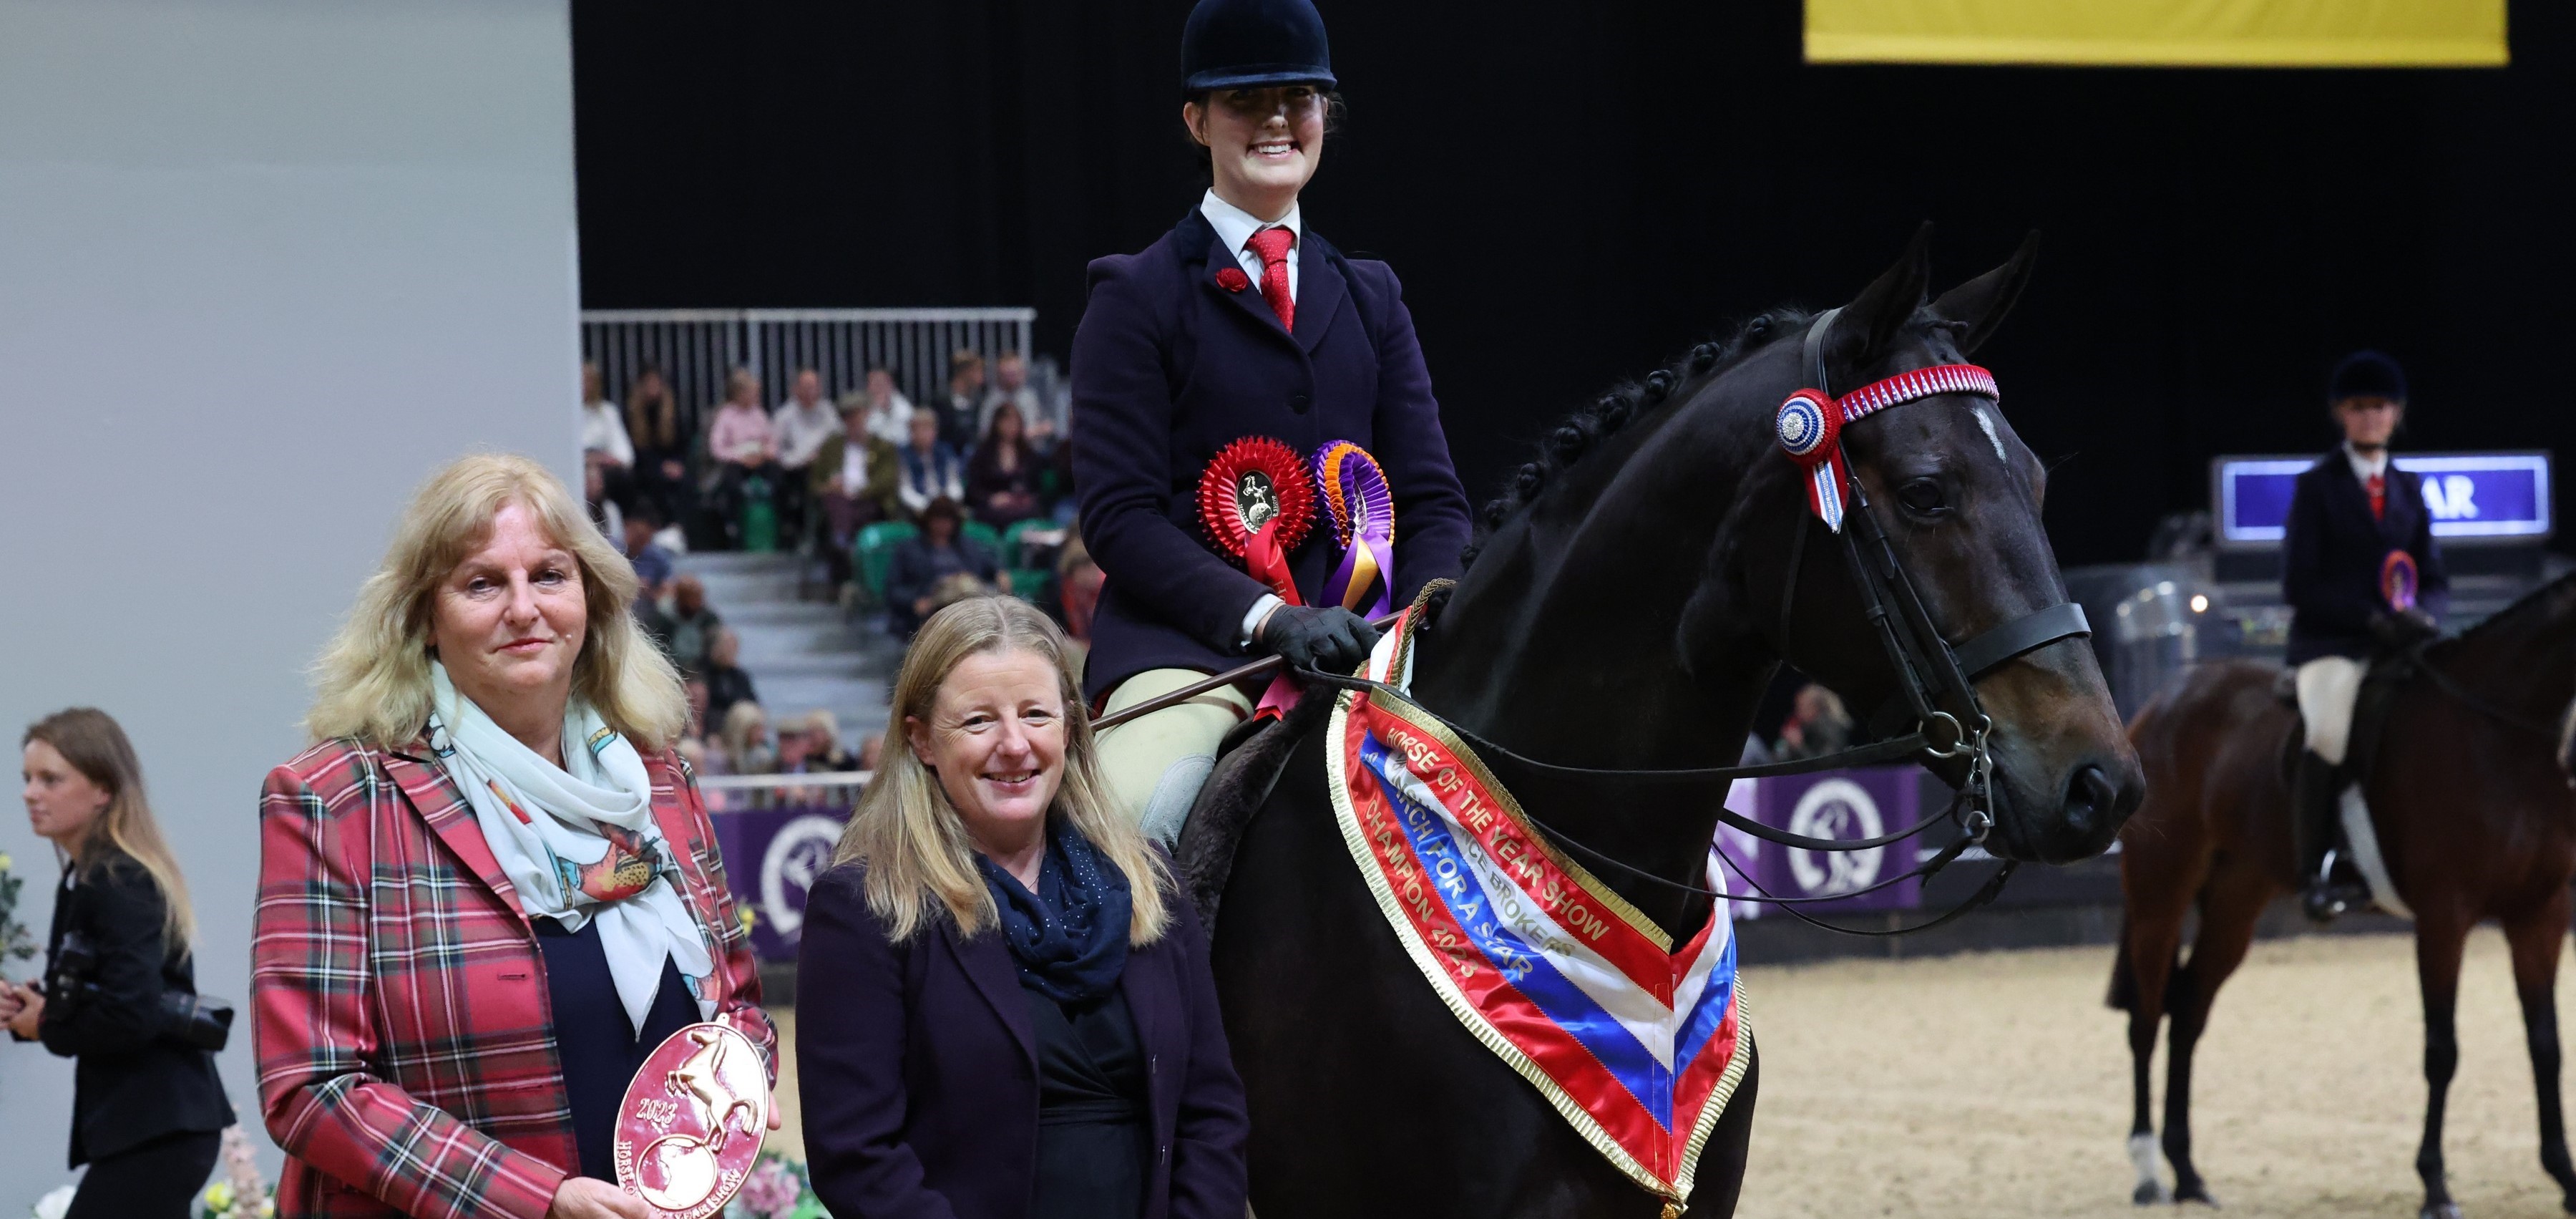 Homebred Hack on a high in SEIB Search for a Star HOYS Final